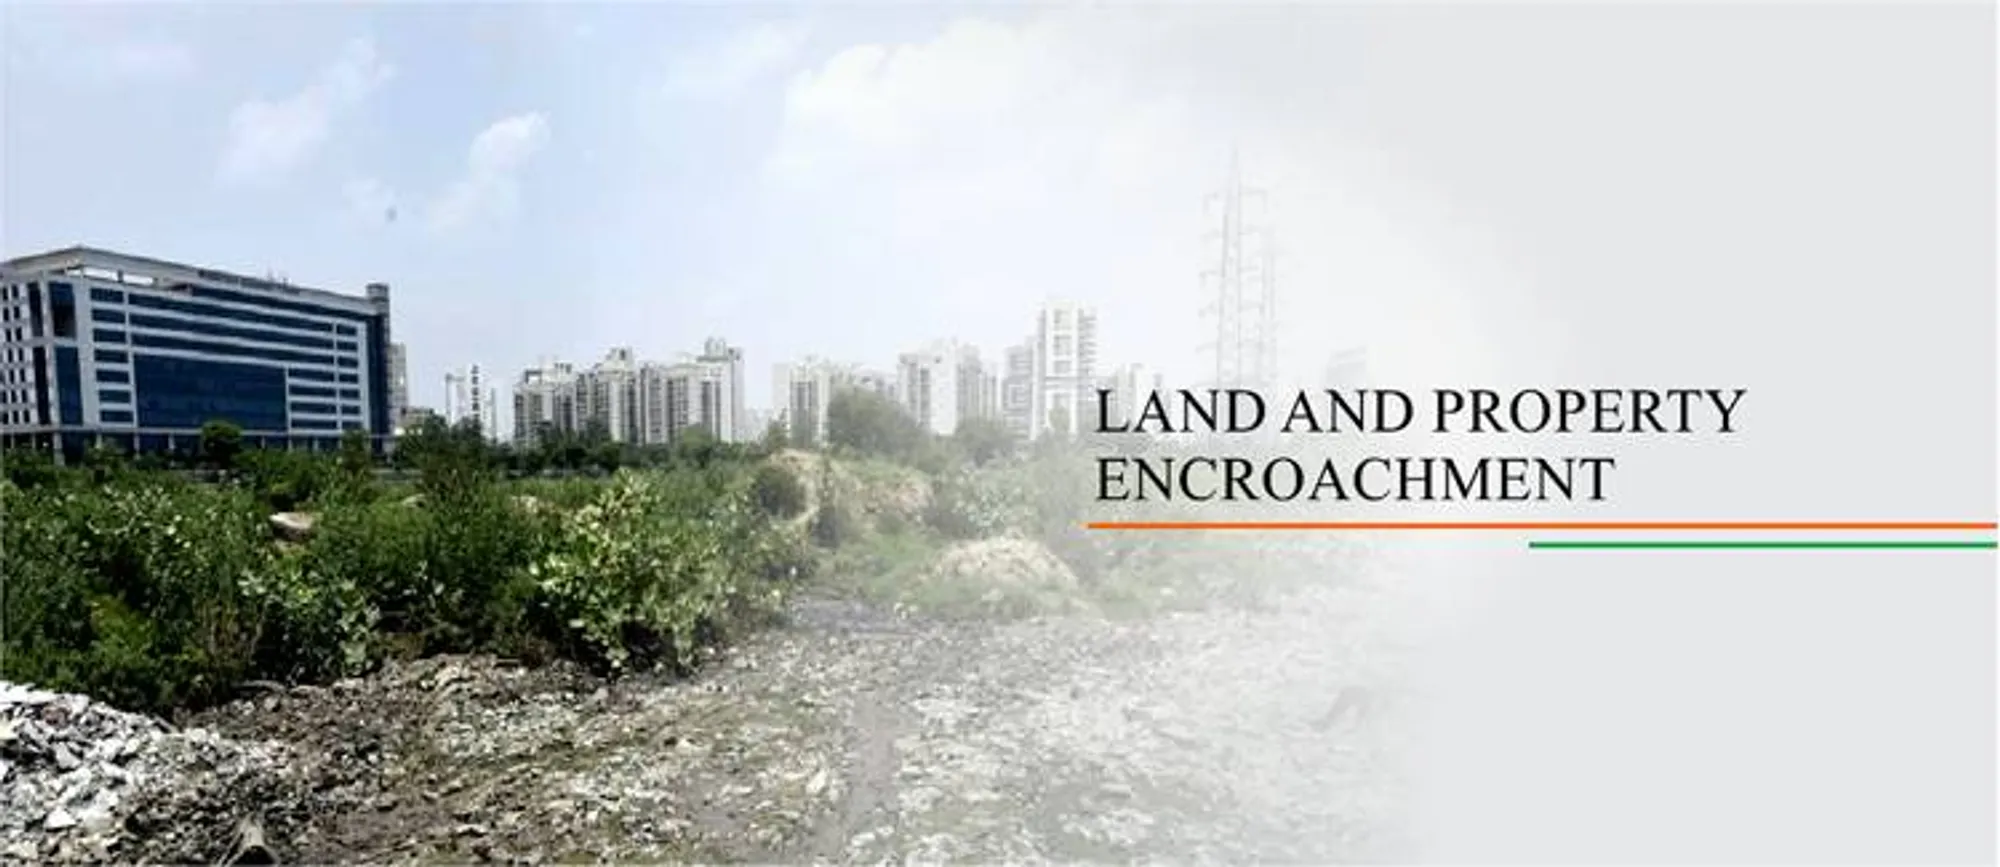 Land and property encroachment India